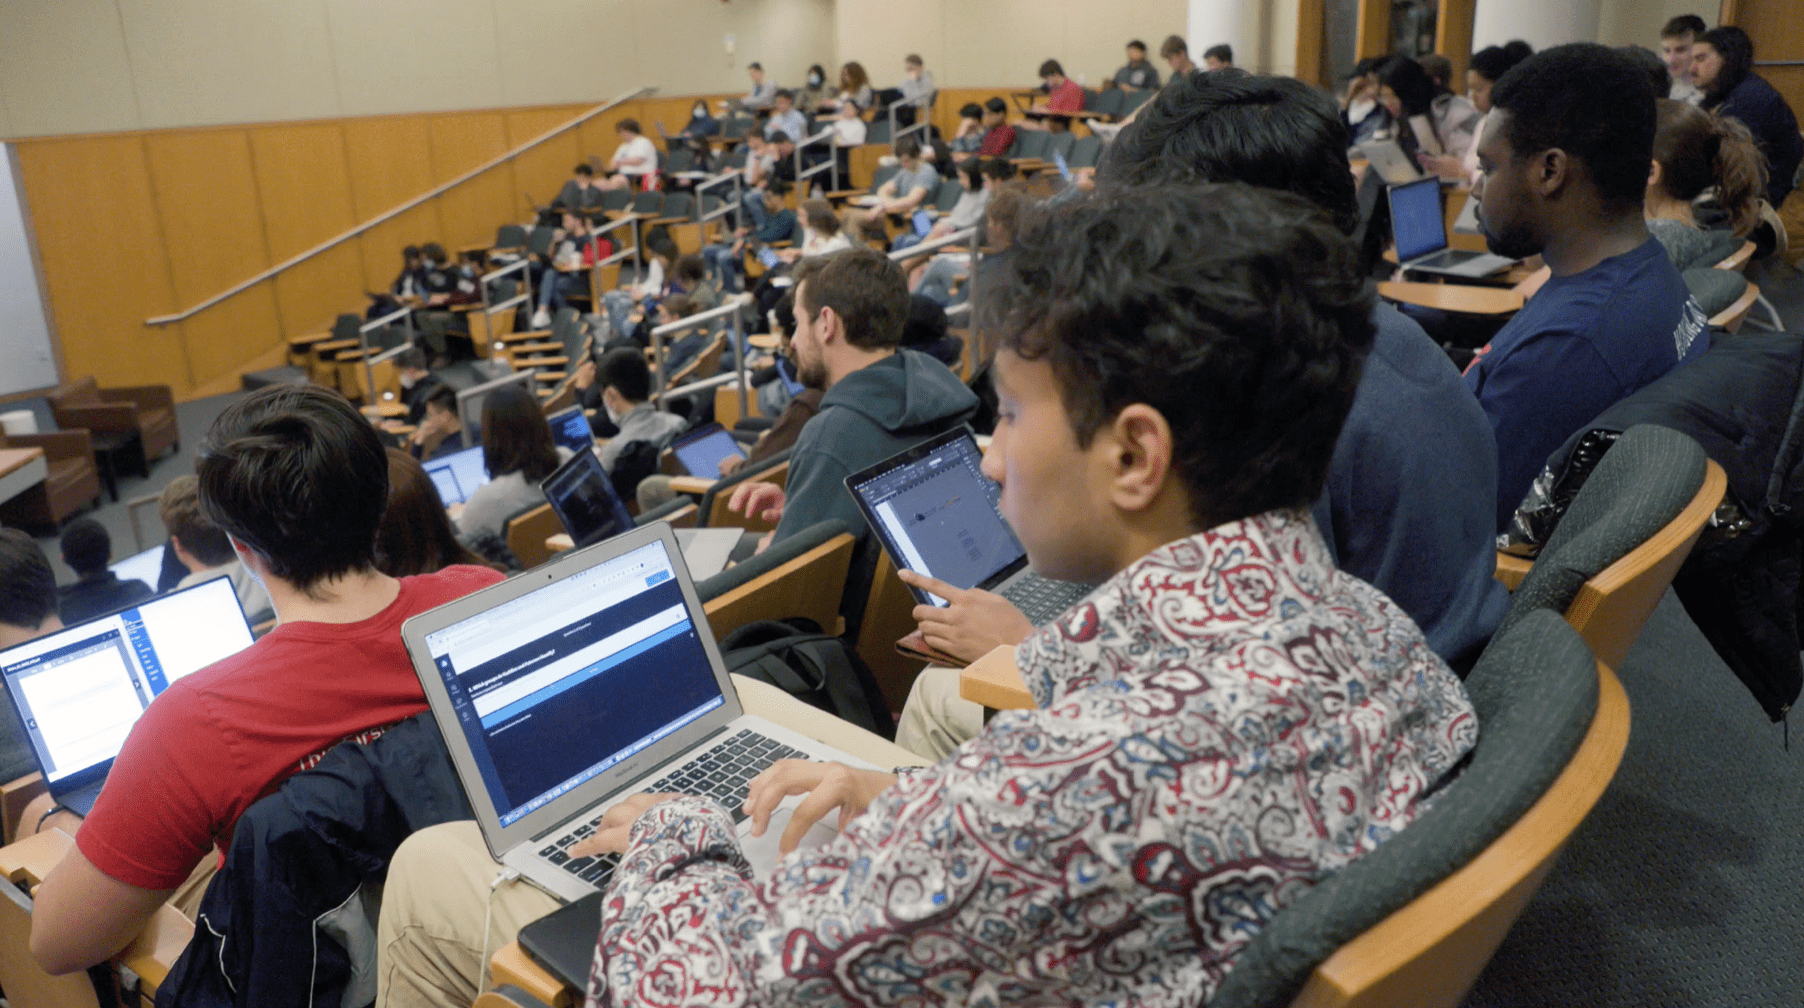 students typing on laptops during class